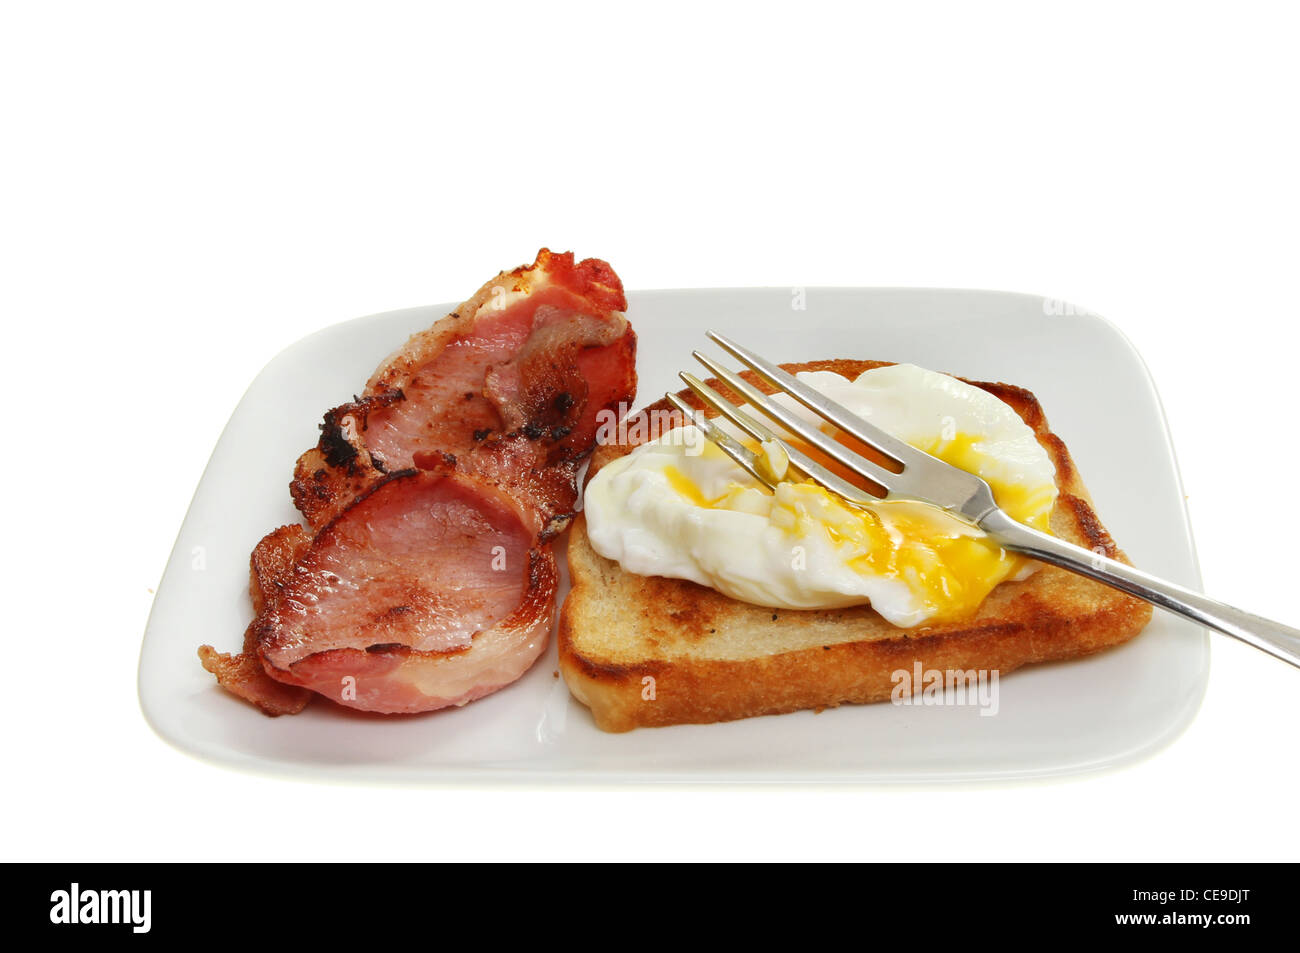 Poached egg with a fork resting in runny yolk with fried bread and bacon on a plate isolated against white Stock Photo